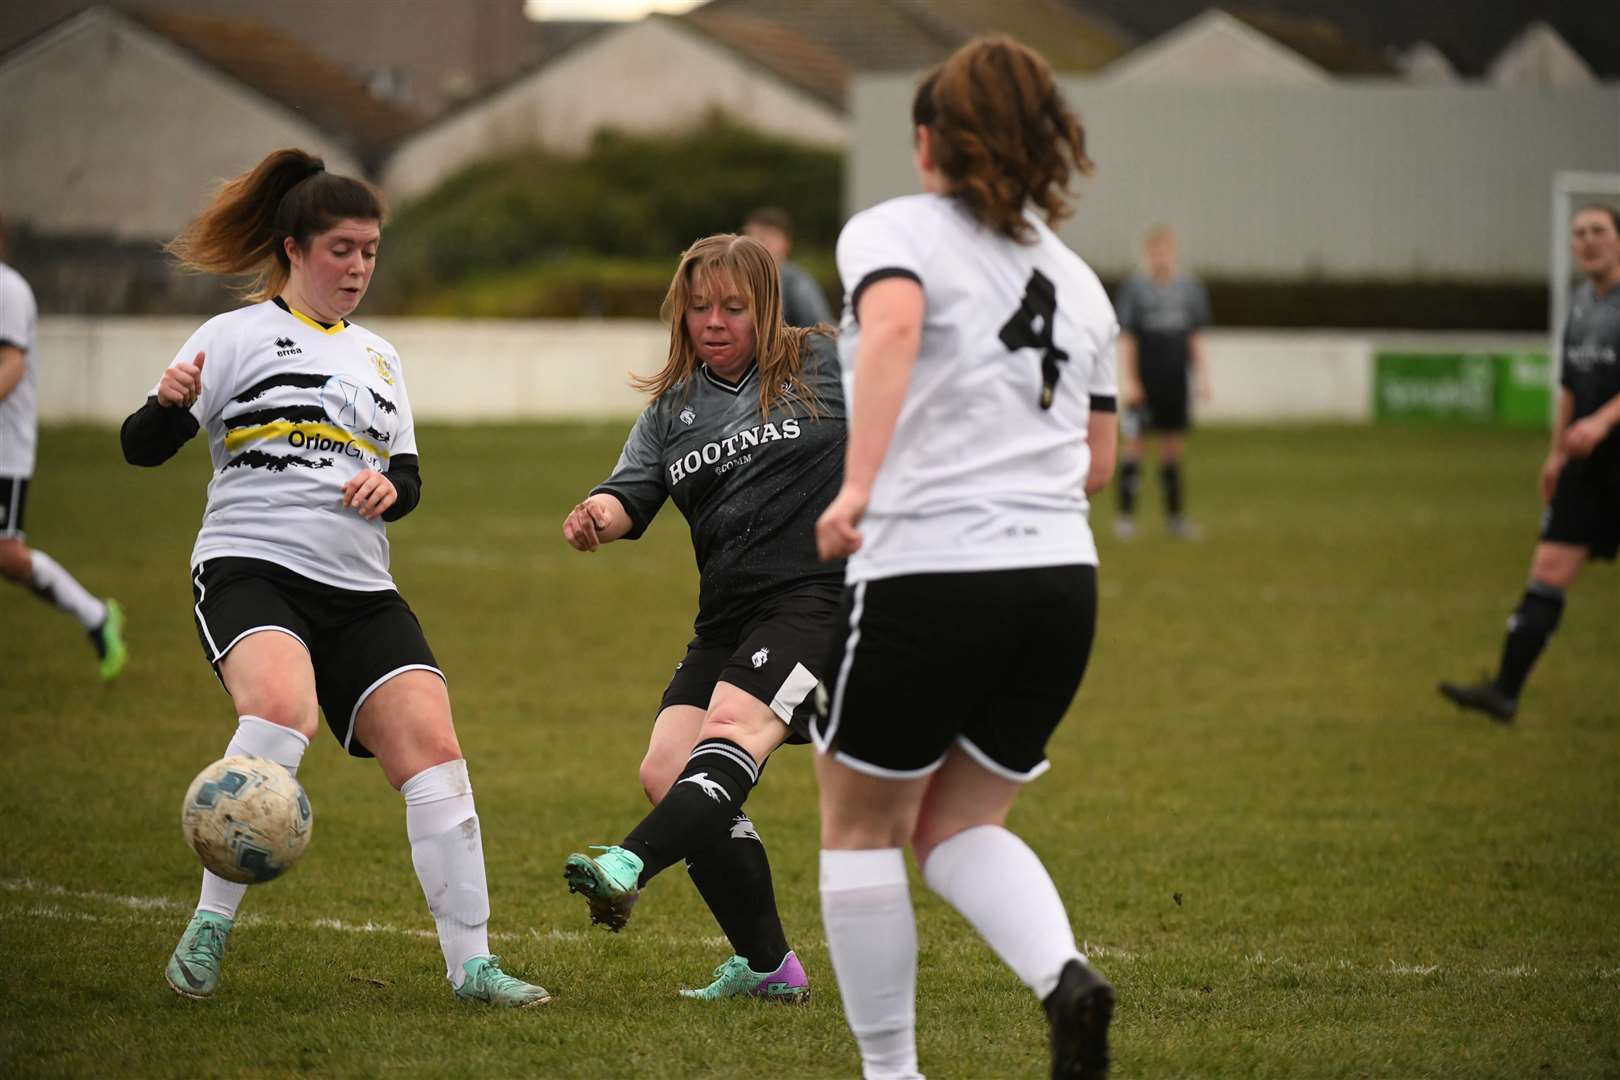 Donna Majilton scoring one of her two goals at Grant Street Park. Picture: James Mackenzie